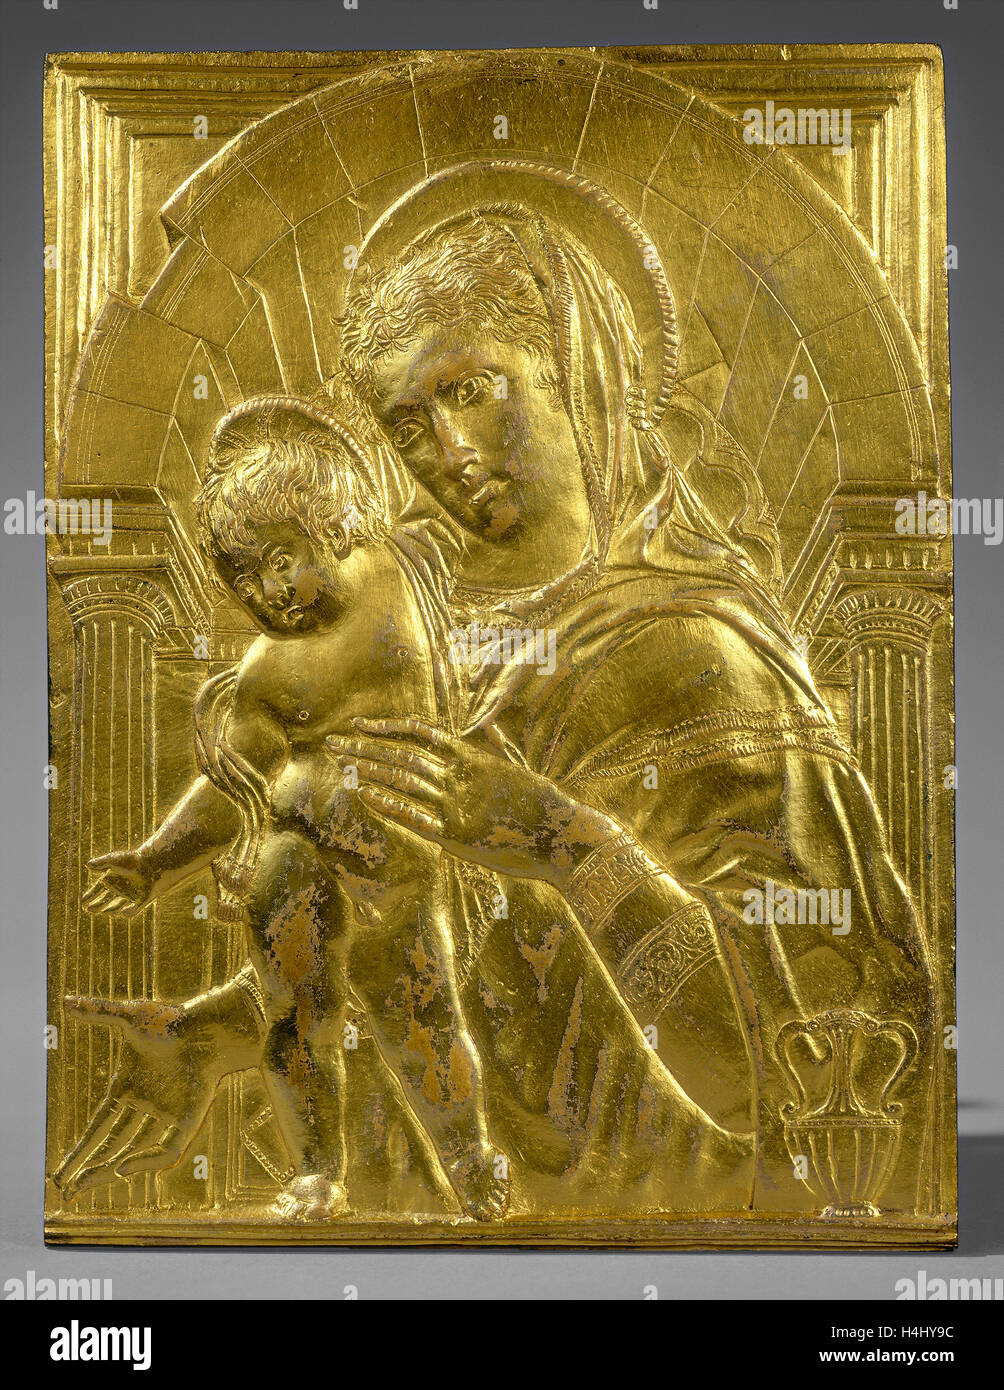 Follower of Donatello, Madonna and Child within an Arch, mid 15th century, gilt bronze Stock Photo